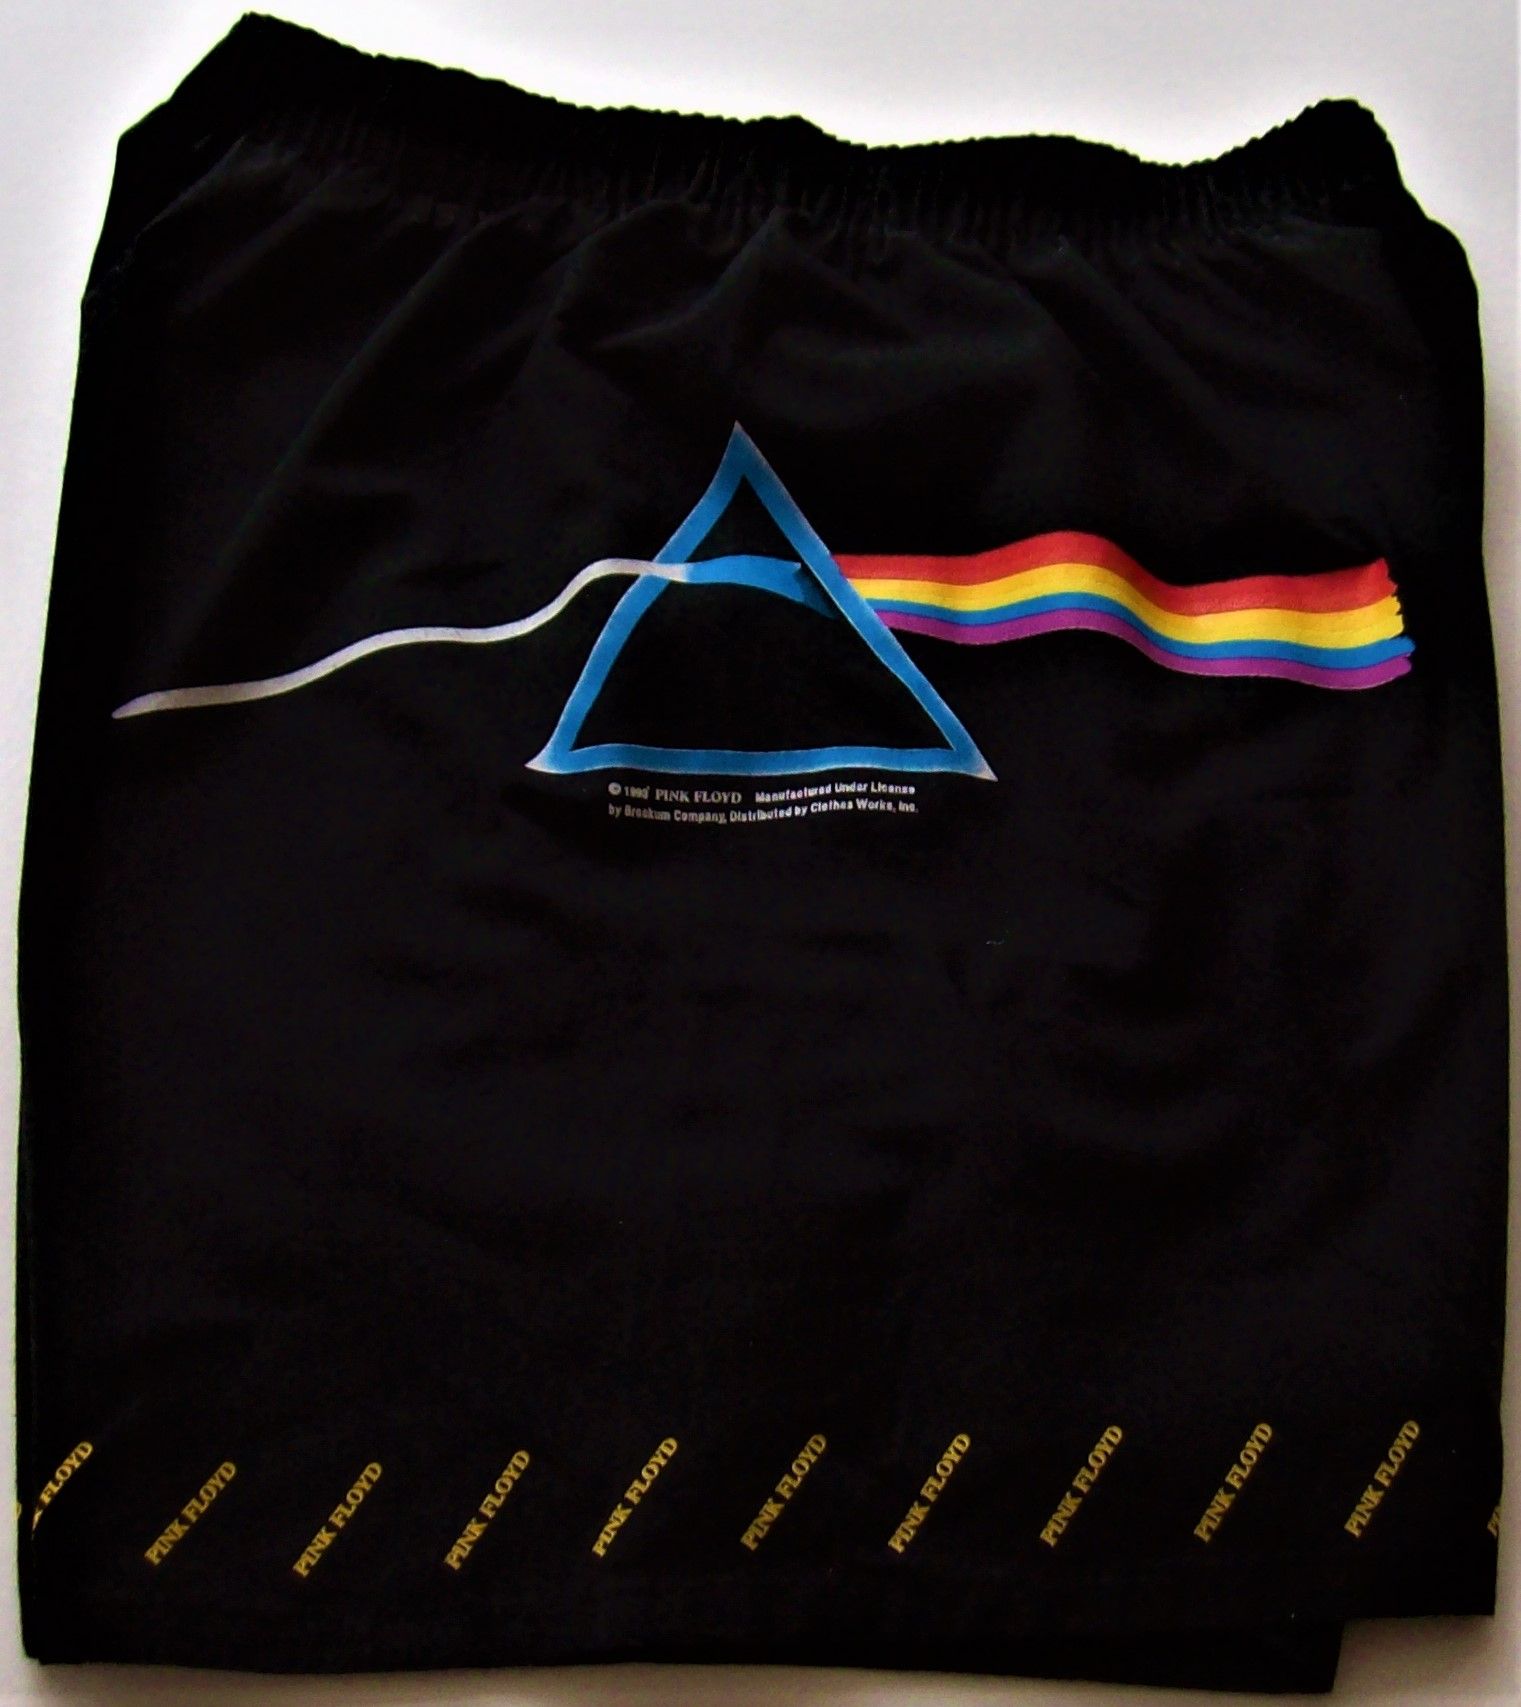 PINK FLOYD MERCHANDISING SHORTS FROM THE 'DIVISION BELL' EUROPEAN TOUR 1994